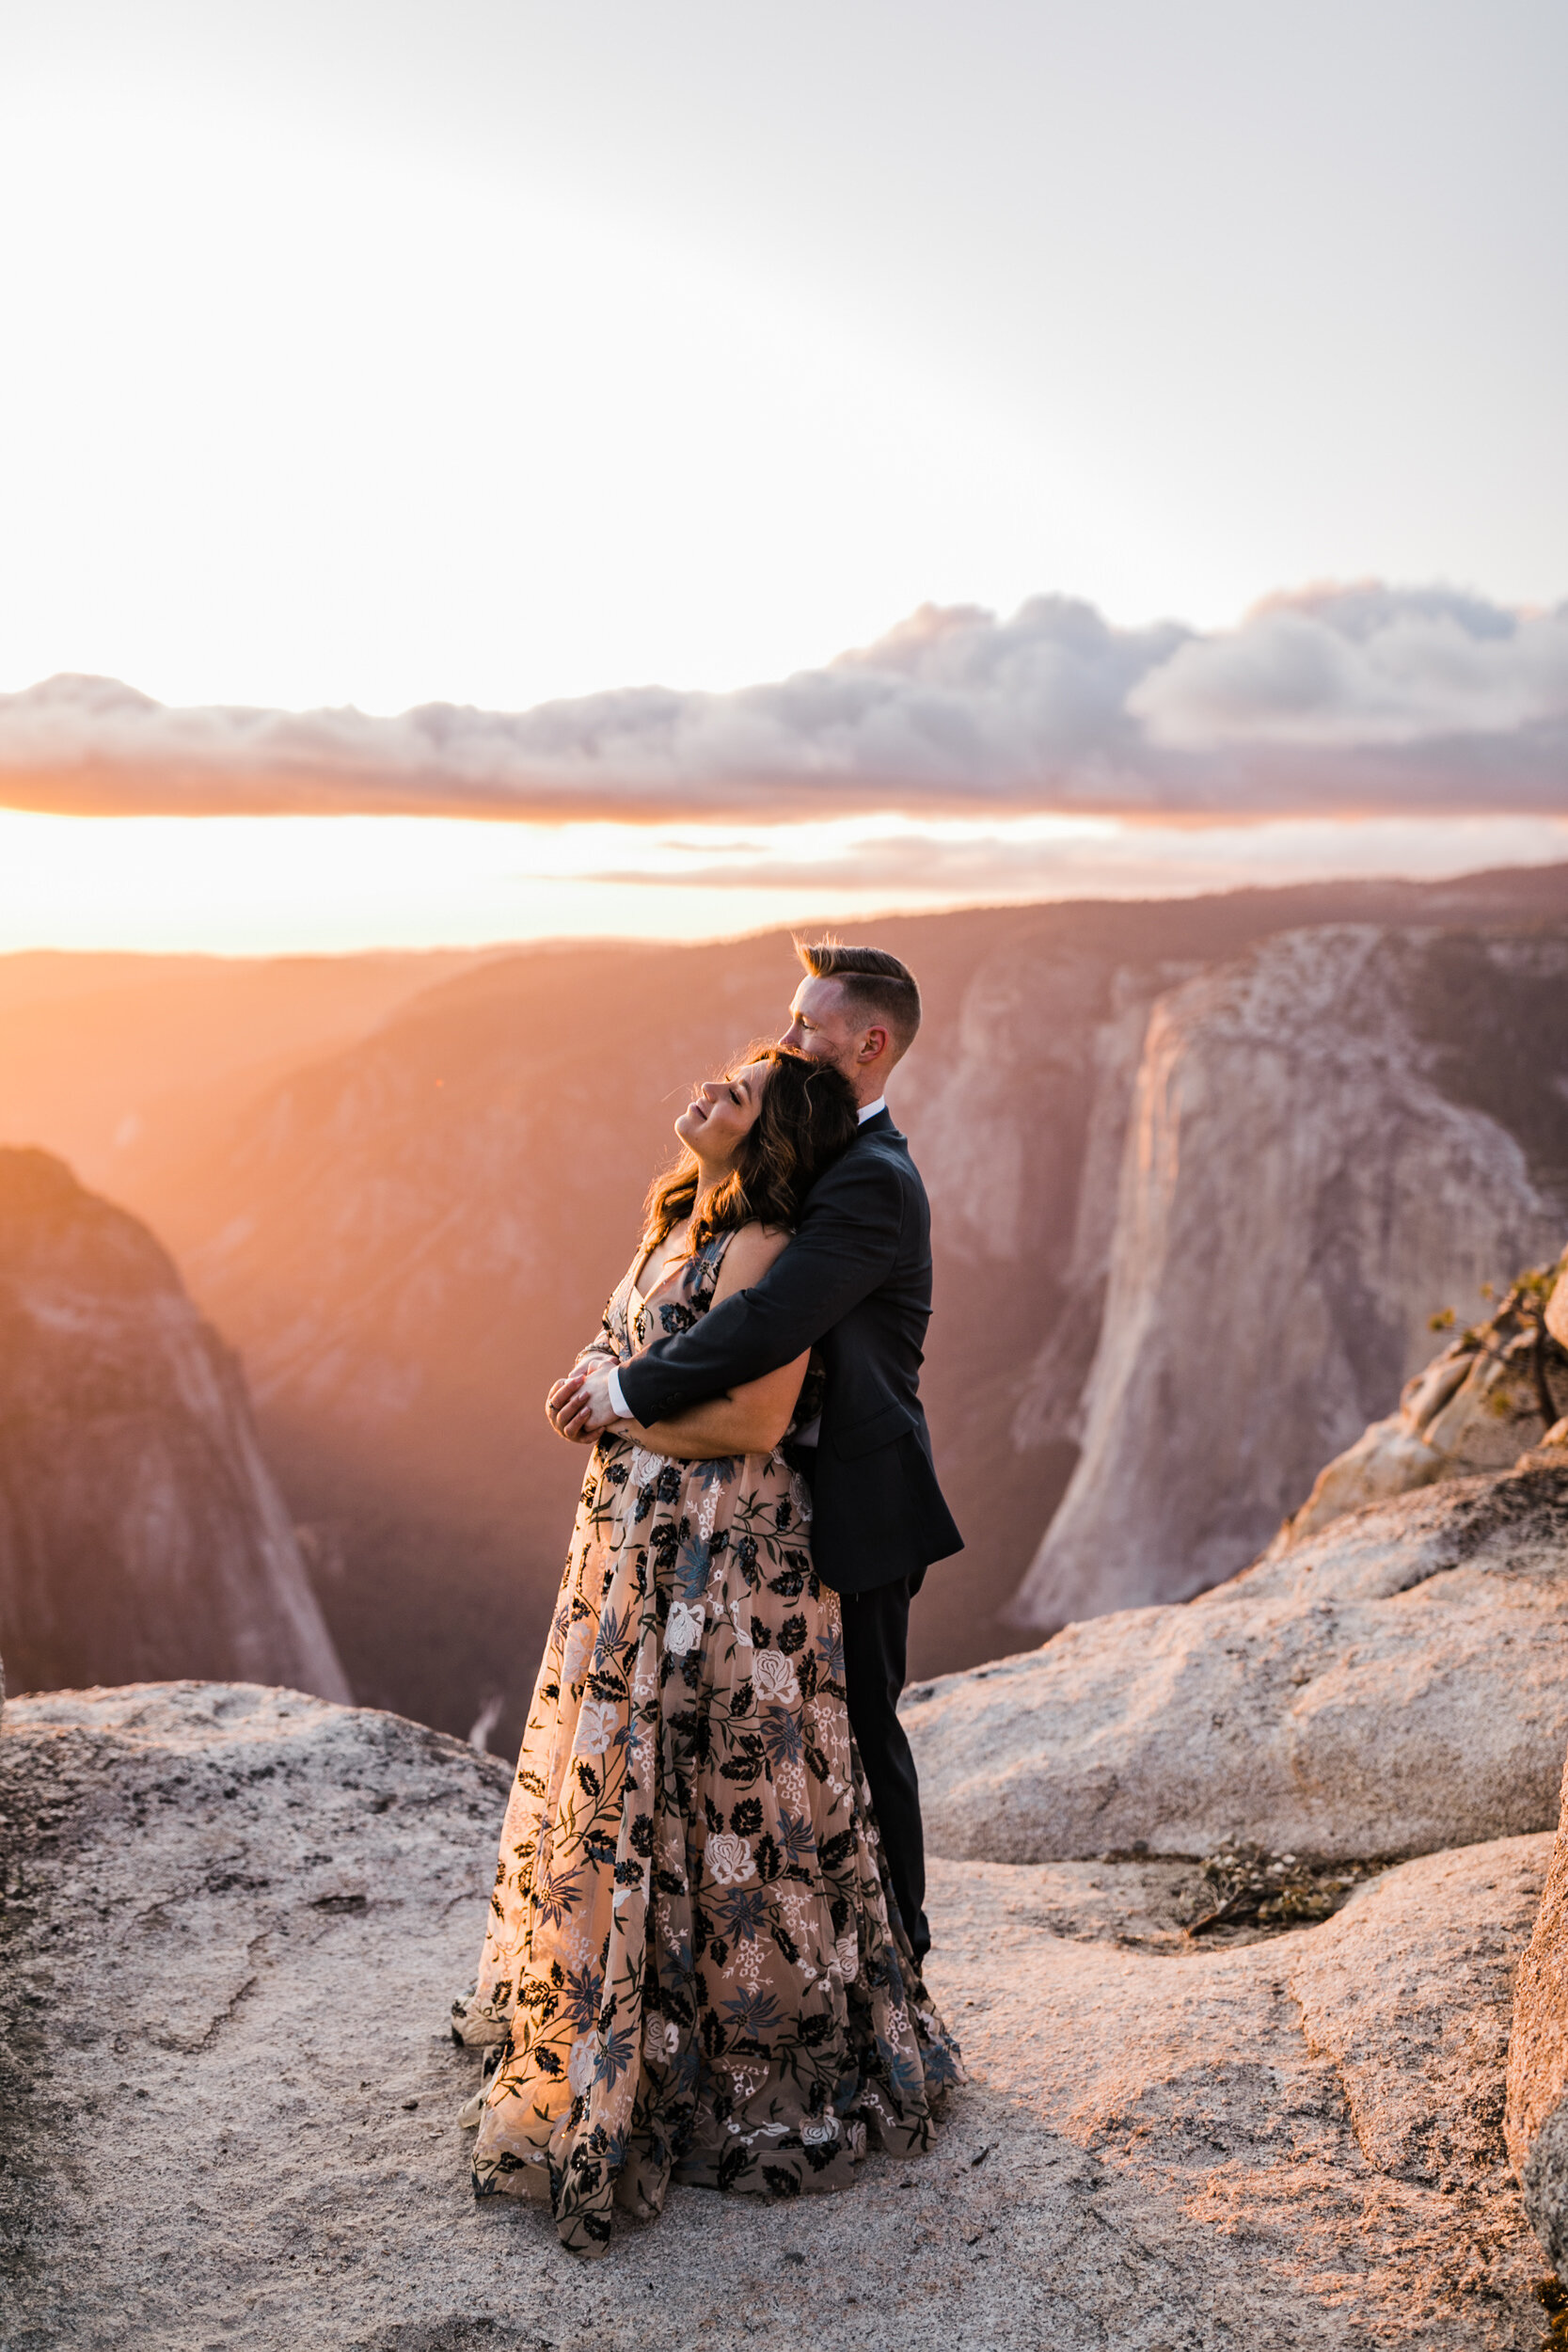 Hiking Engagement Session at Taft Point in Yosemite National Park | The Hearnes Adventure Photography